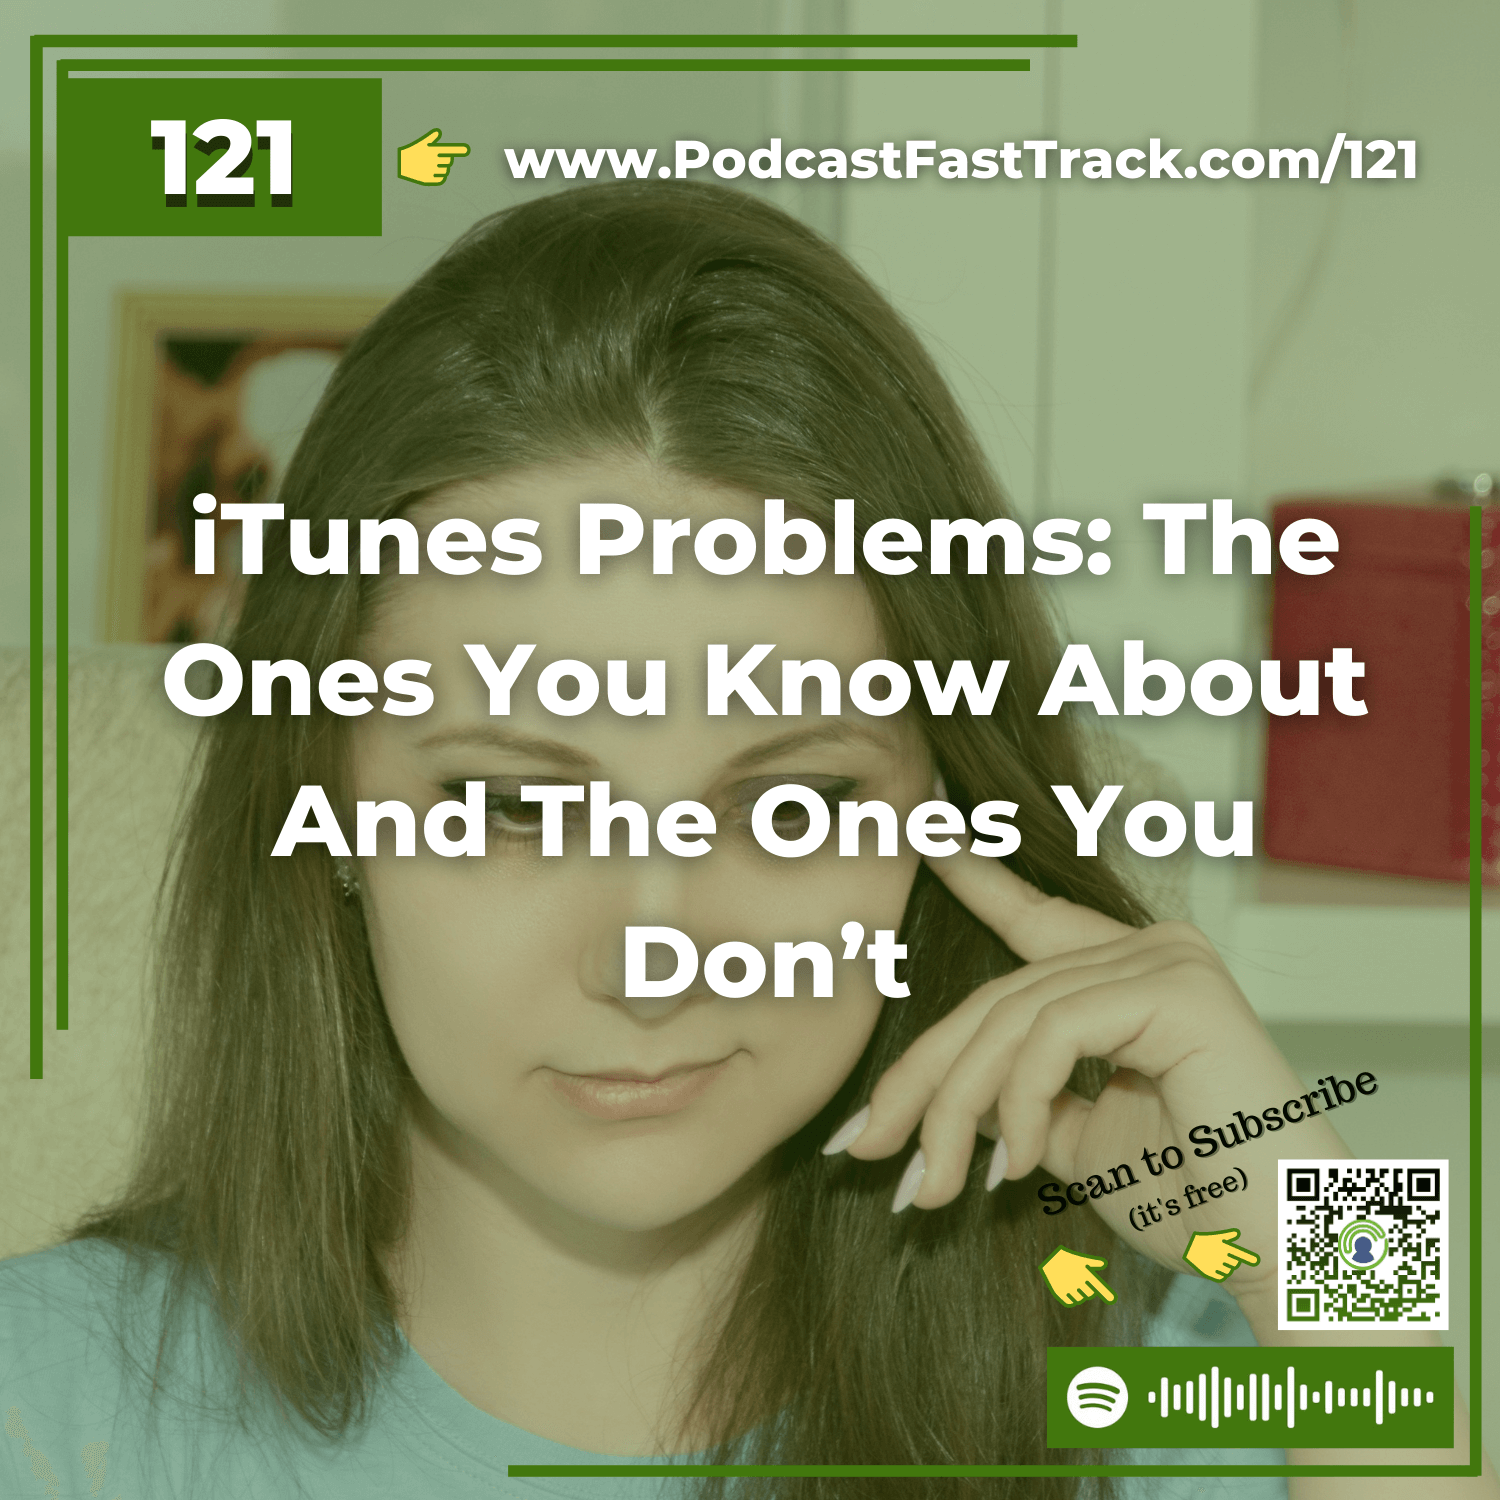 121: iTunes Problems: The Ones You Know About And The Ones You Don’t